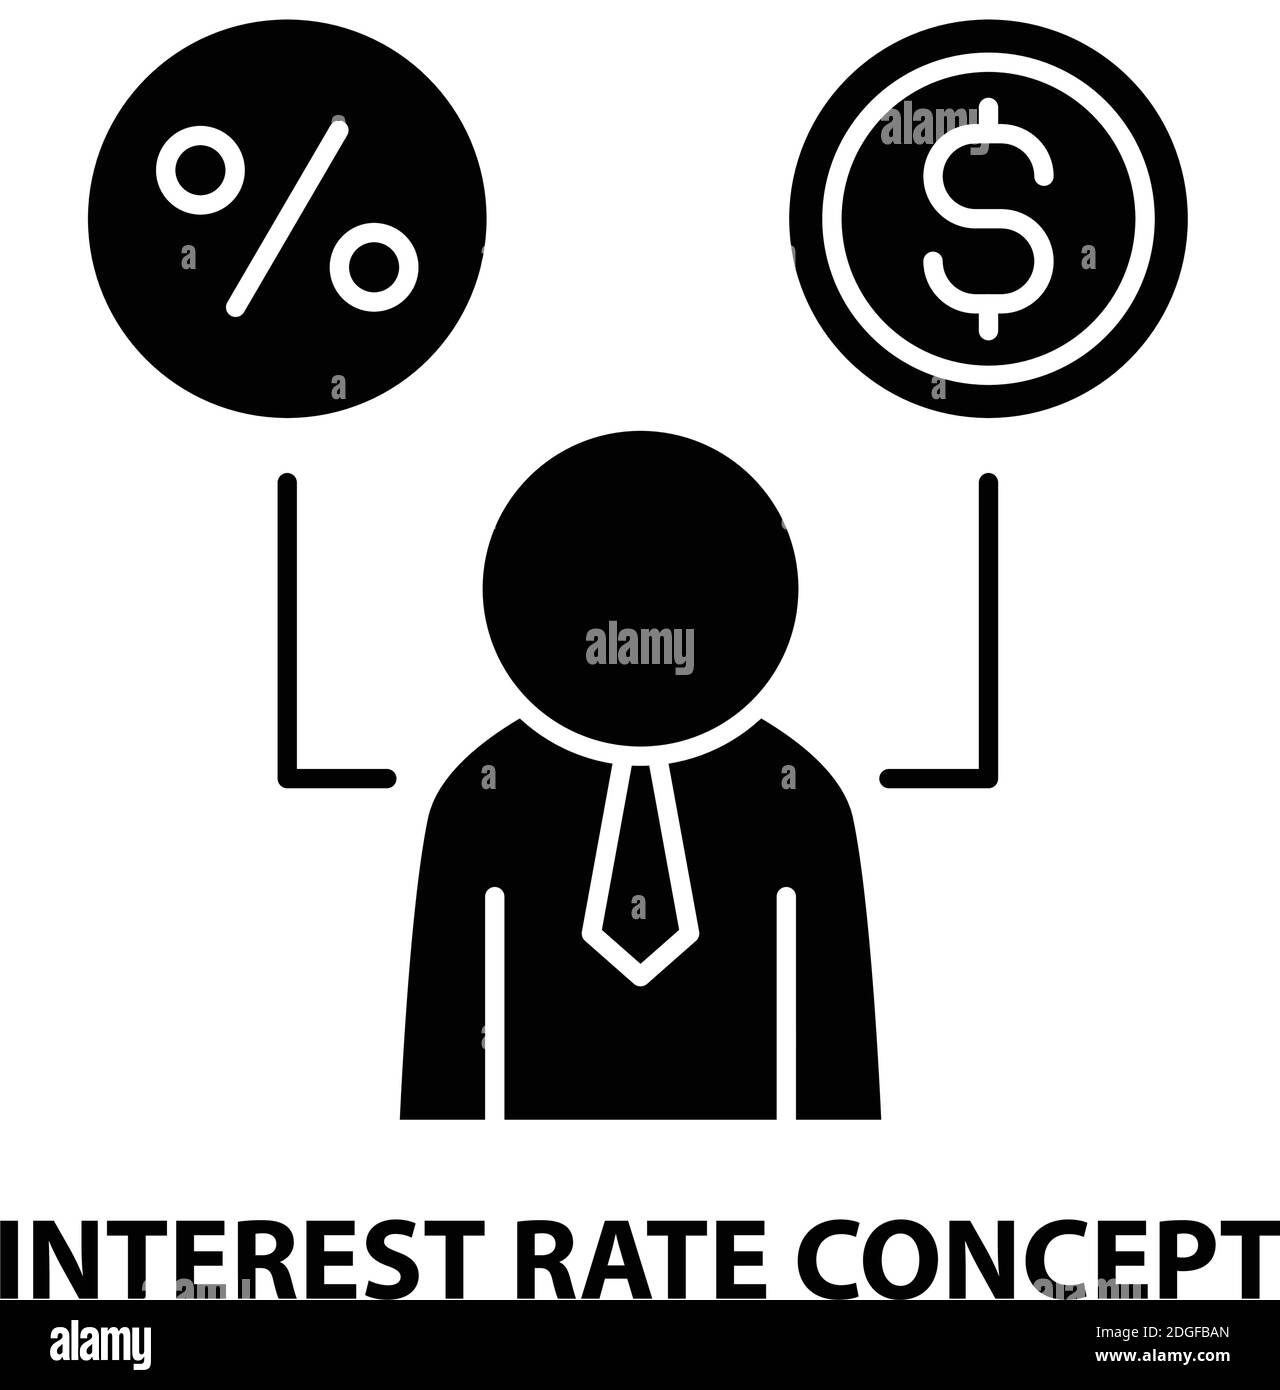 interest rate concept icon, black vector sign with editable strokes